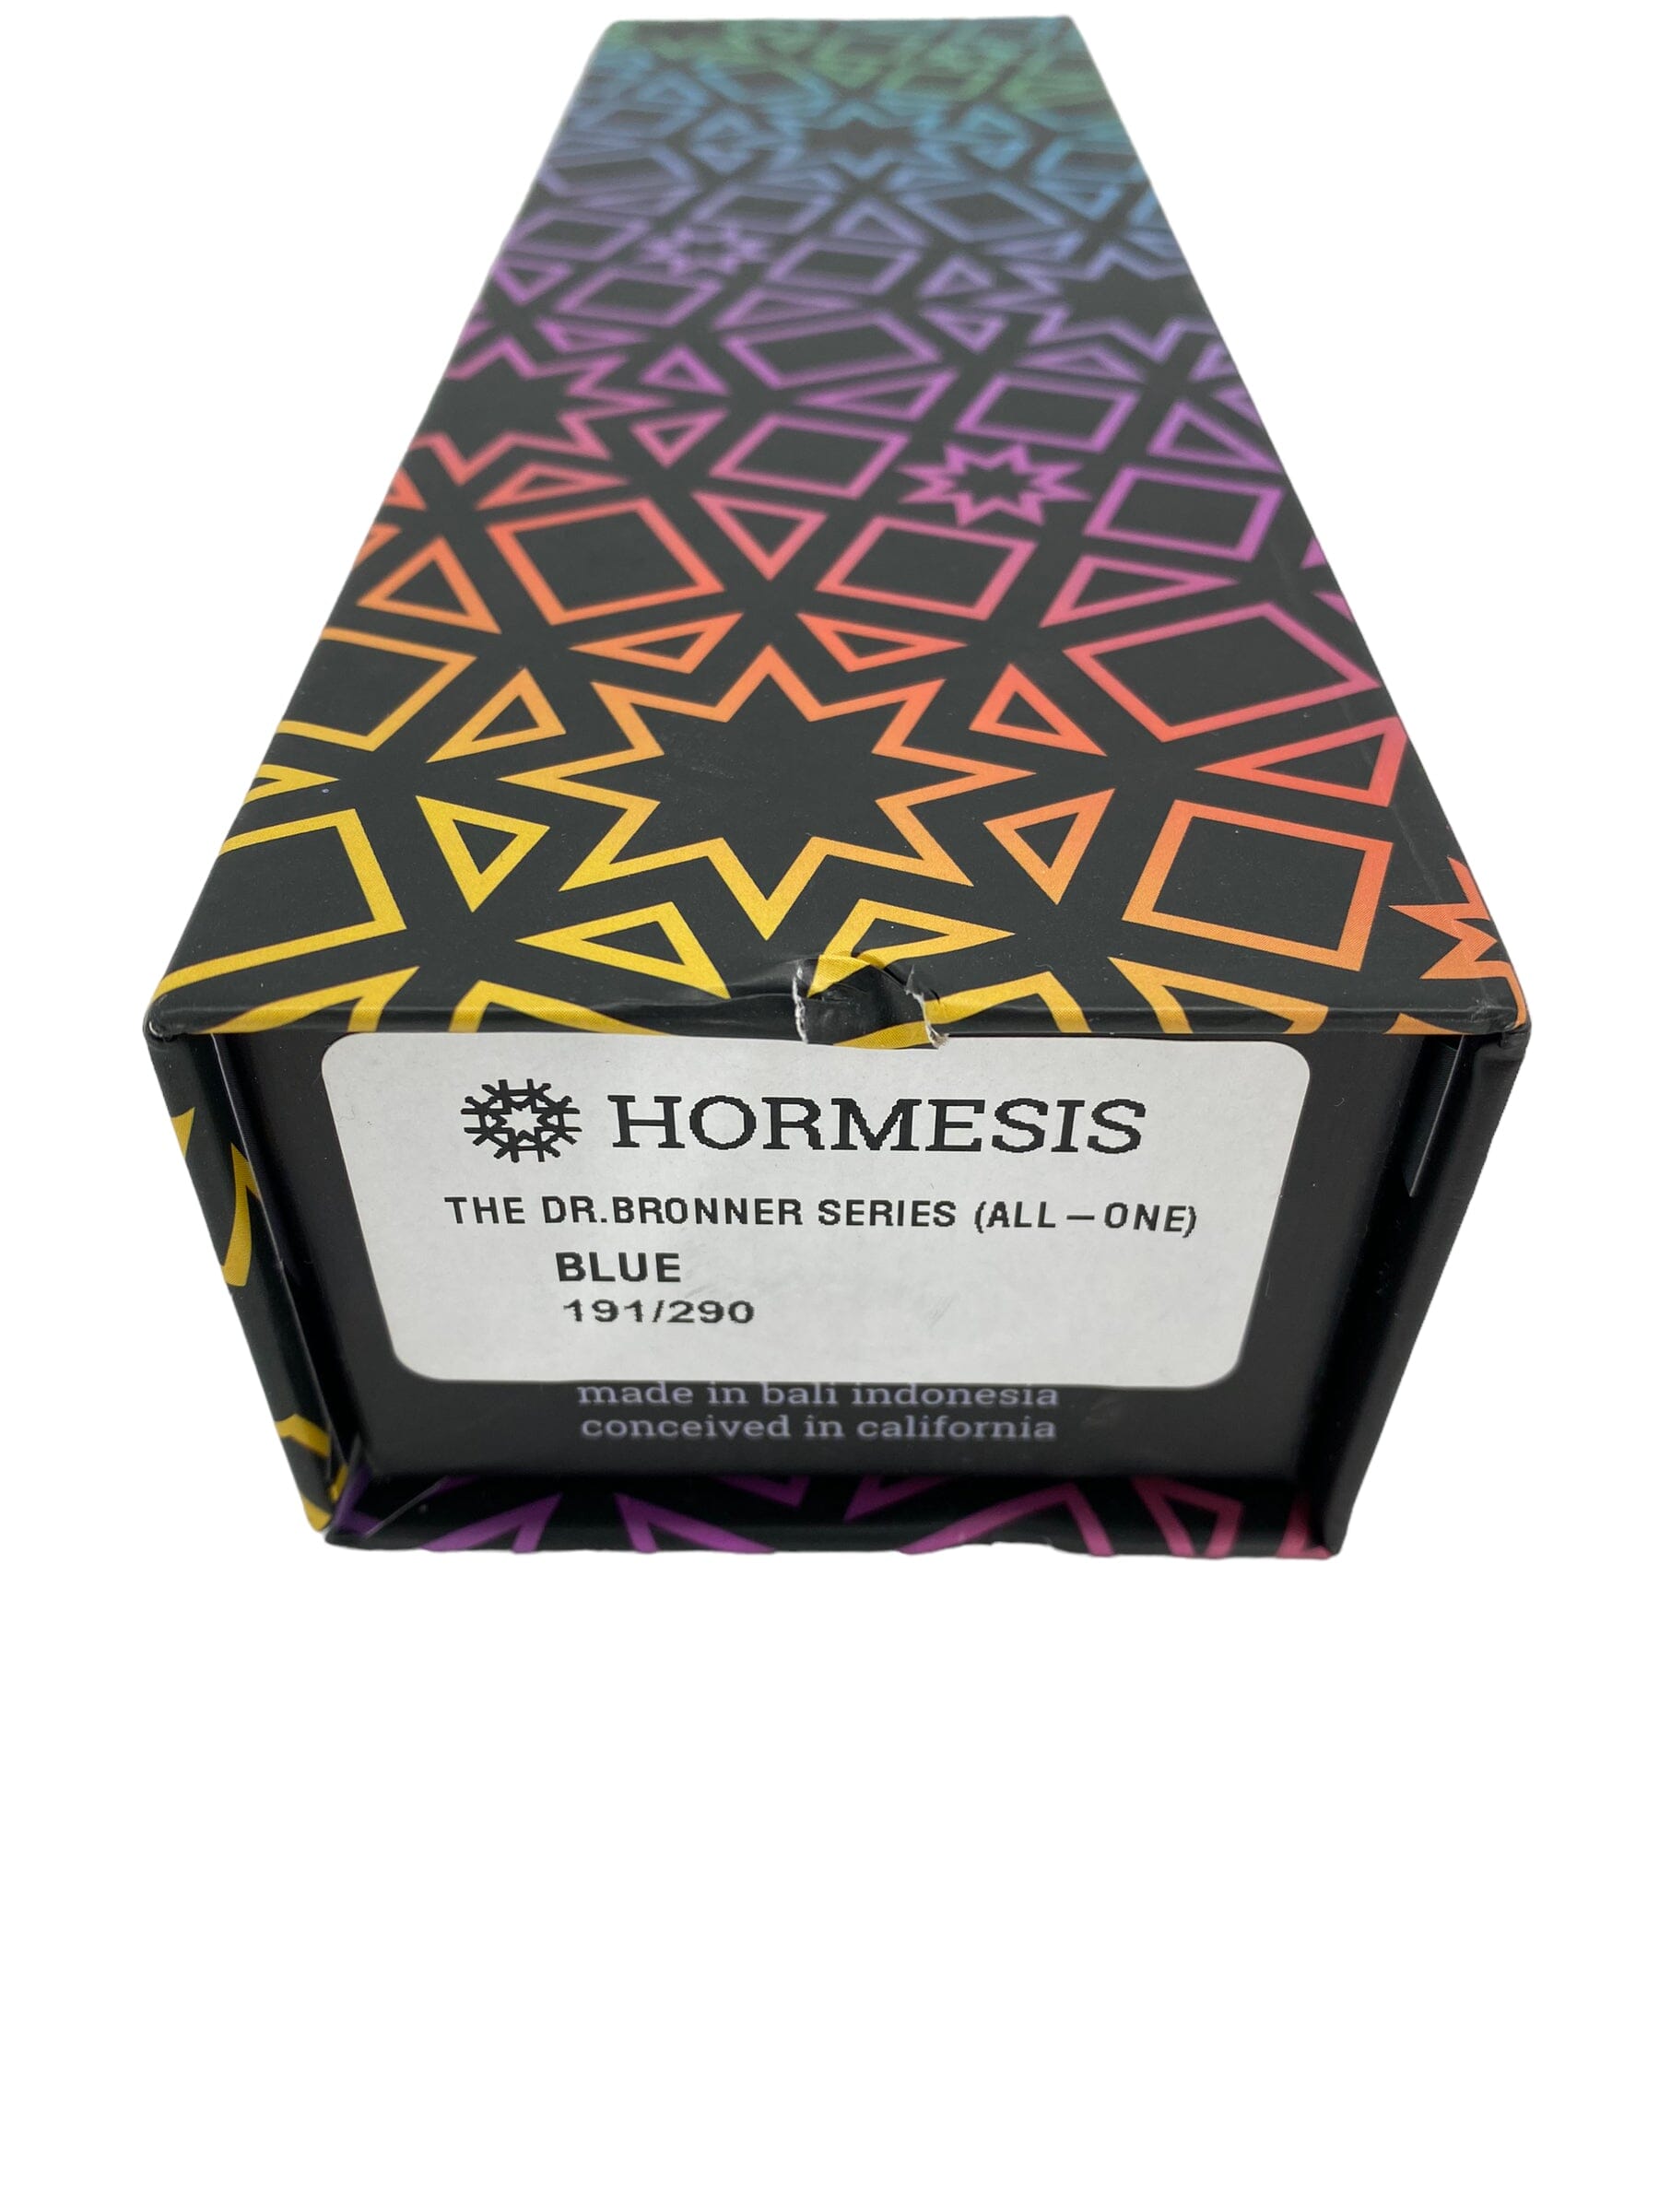 Used Hormesis Headband The Dr. Bronner Series (All One) 191/290 Paintball Gun from CPXBrosPaintball Buy/Sell/Trade Paintball Markers, Paintball Hoppers, Paintball Masks, and Hormesis Headbands